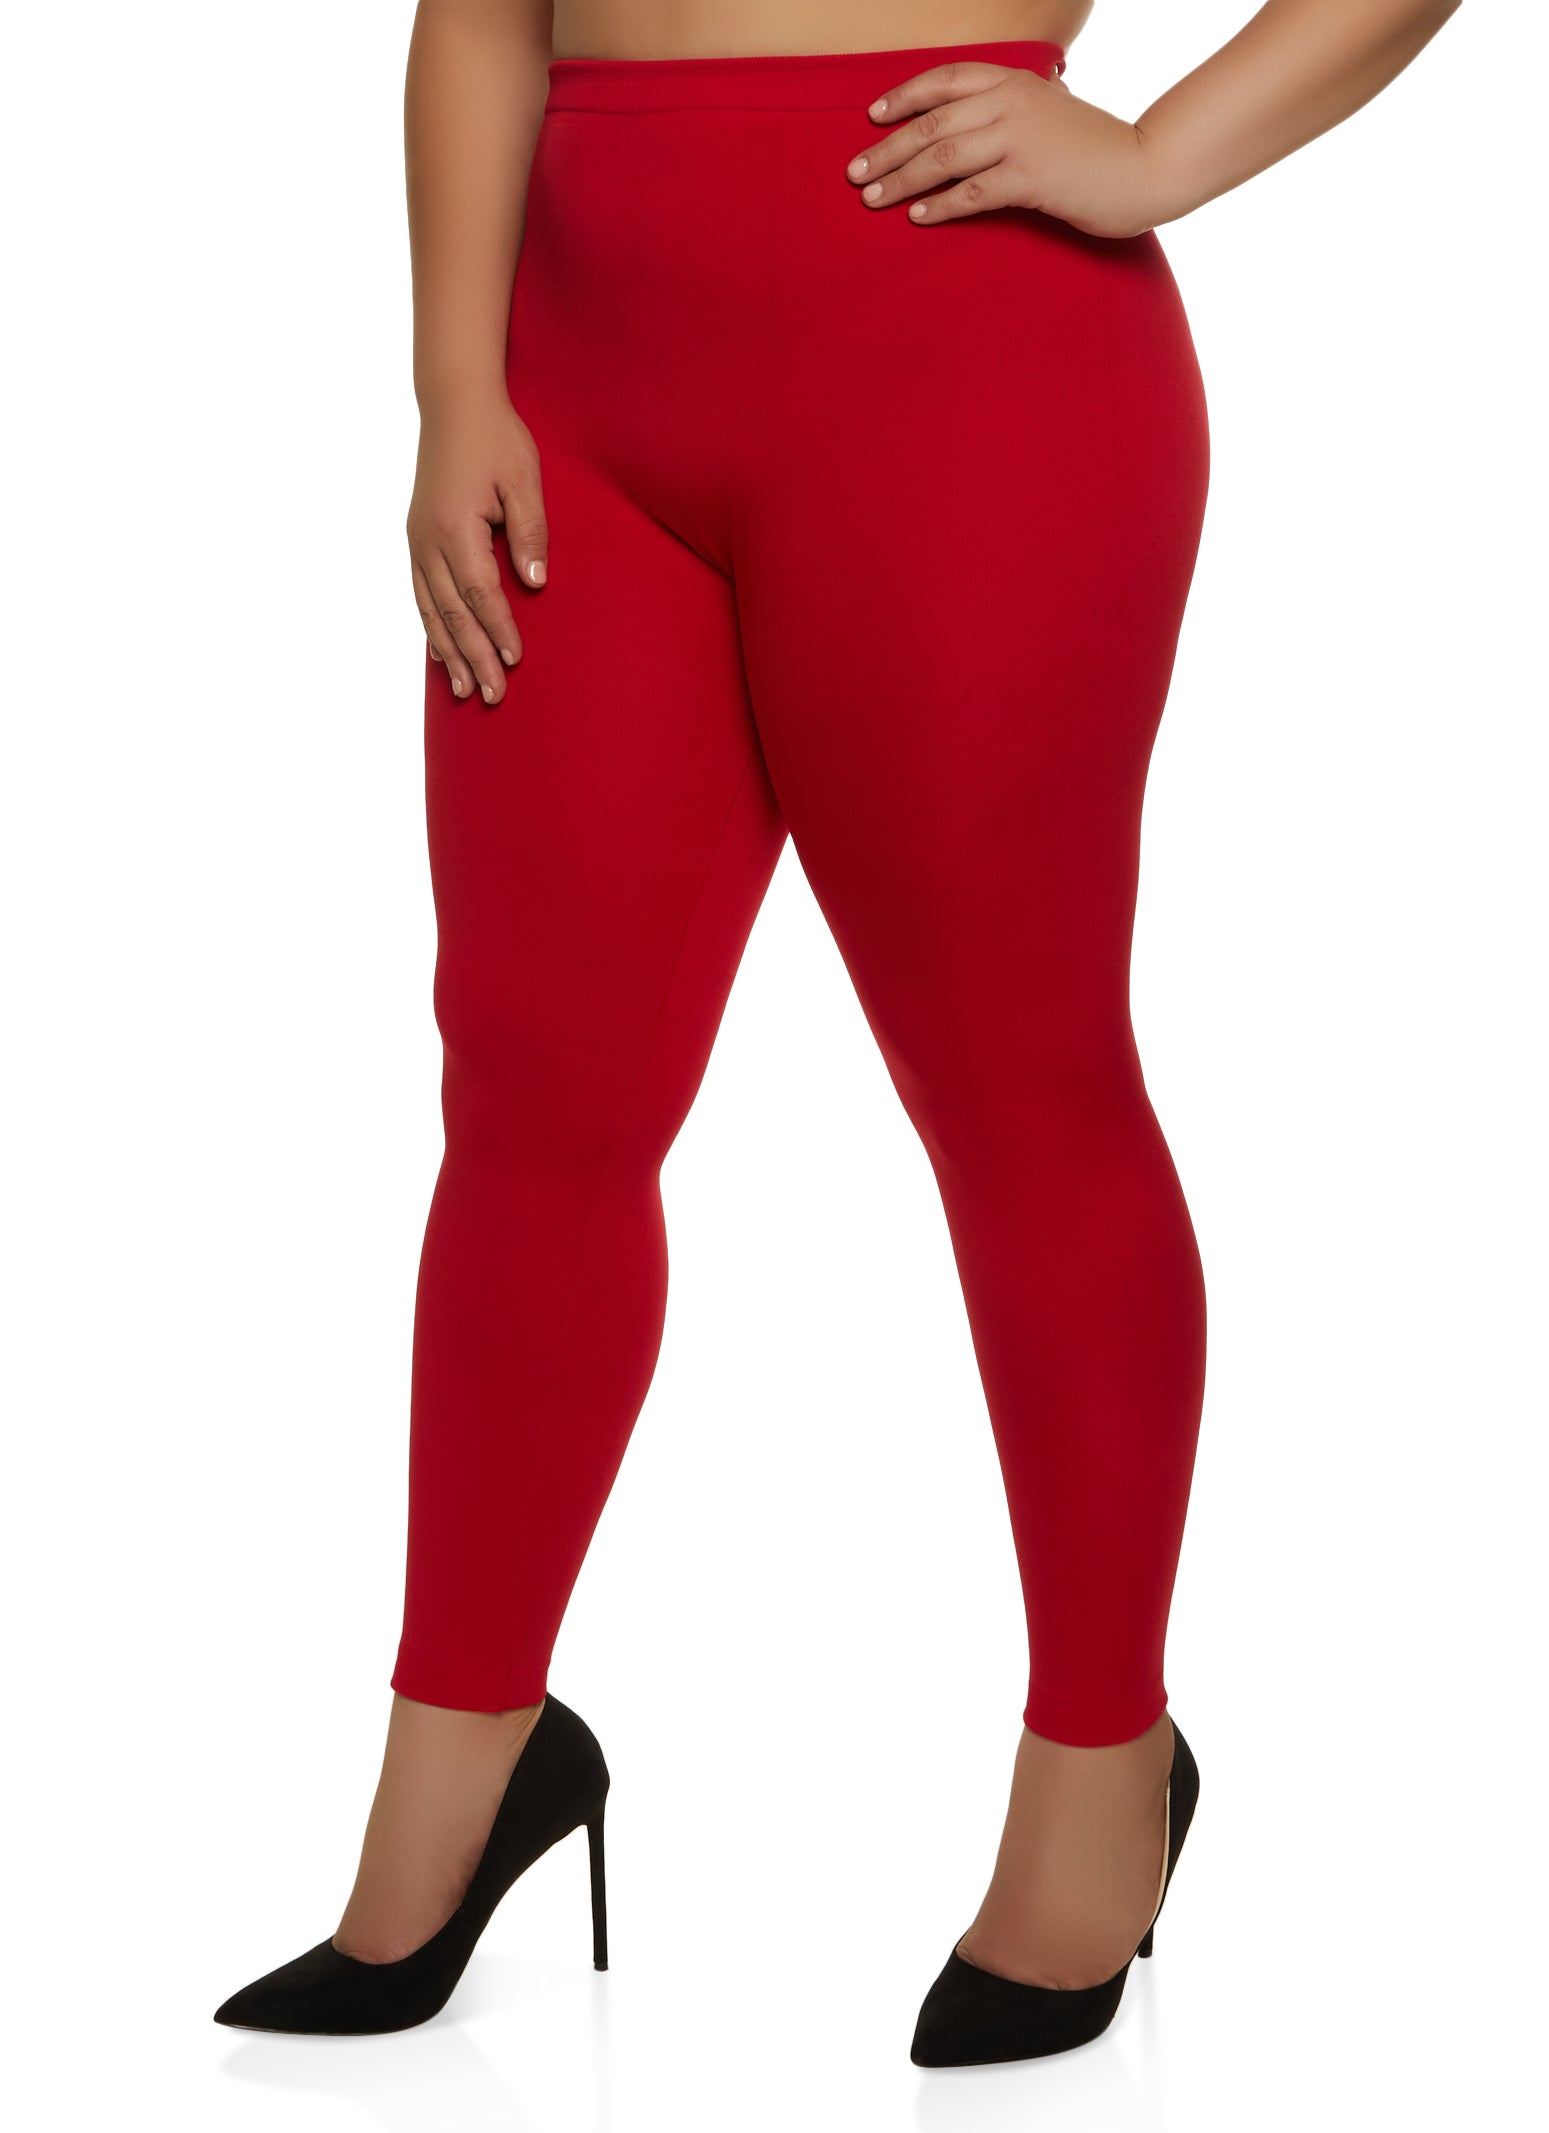 Rainbow Shops Womens Plus Size Seamless Basic High Waisted Leggings, Red, Size  2X-3X